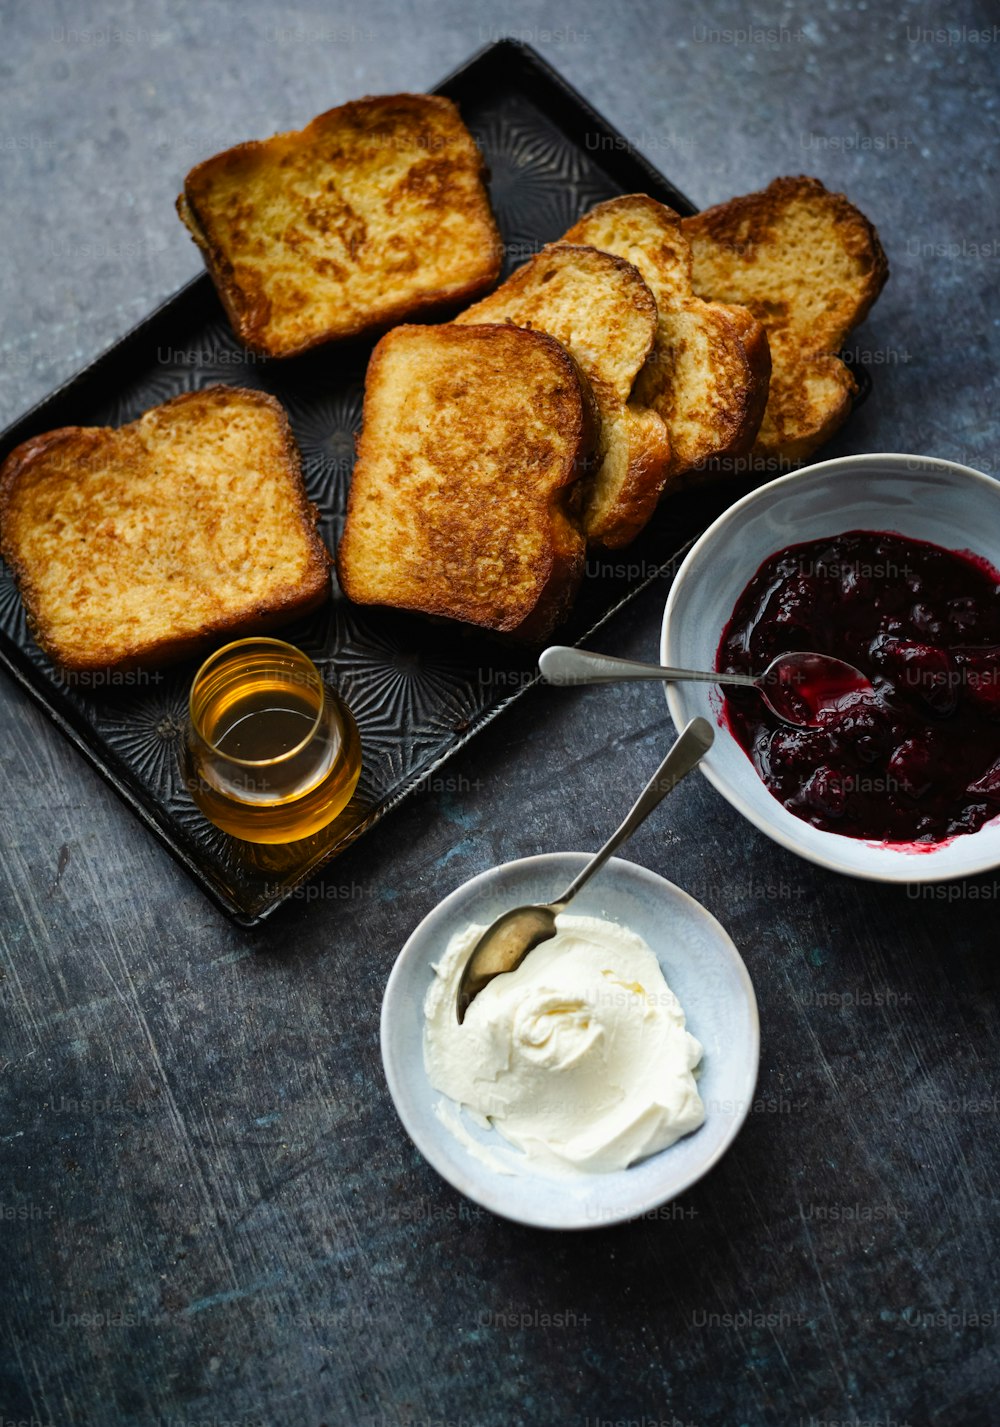 a tray of food with bread, jam, and butter on it